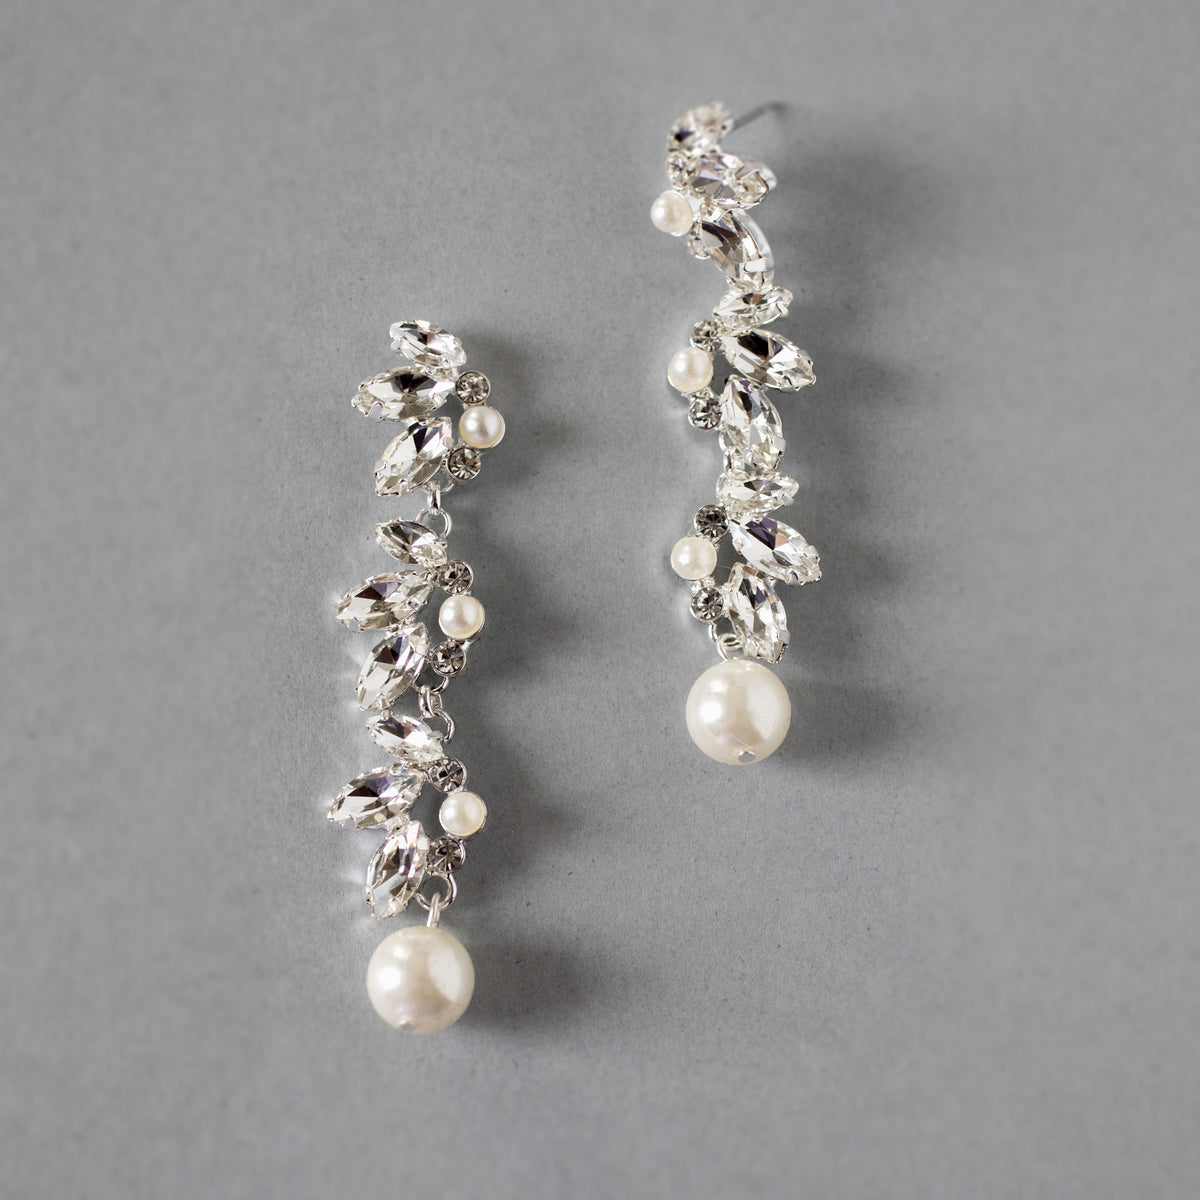 Marquise Crystal Drop Earrings with Pearls - Cassandra Lynne